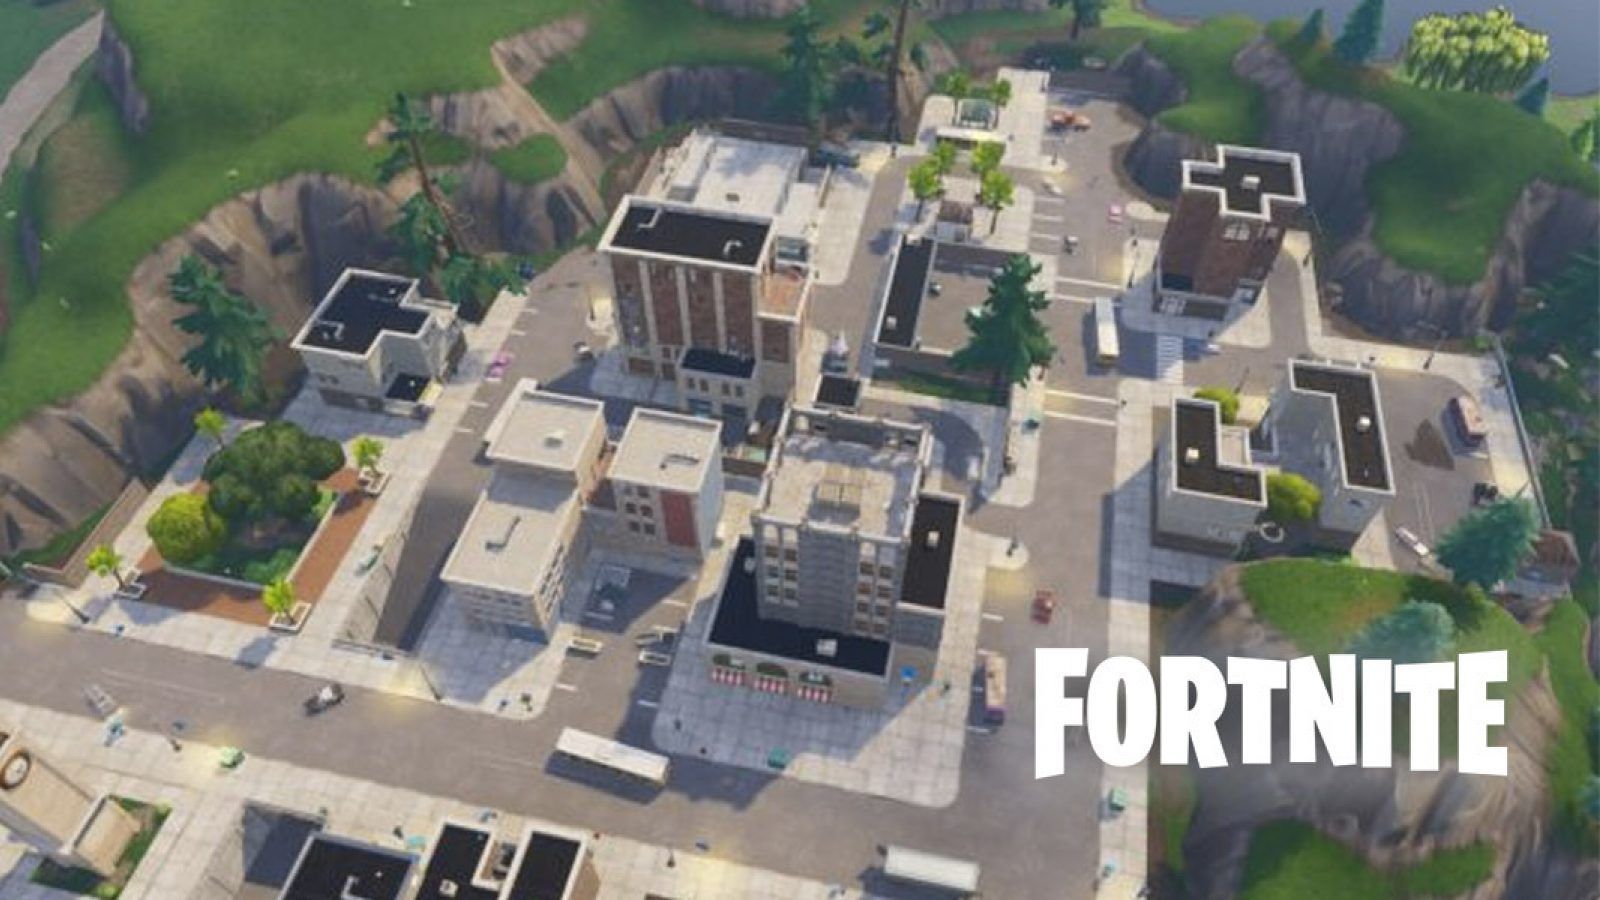 Free download A new building may be arriving to Fortnites Tilted Towers [1600x900] for your Desktop, Mobile & Tablet. Explore Tilted Towers Fortnite Wallpaper. Tilted Towers Fortnite Wallpaper, Neo